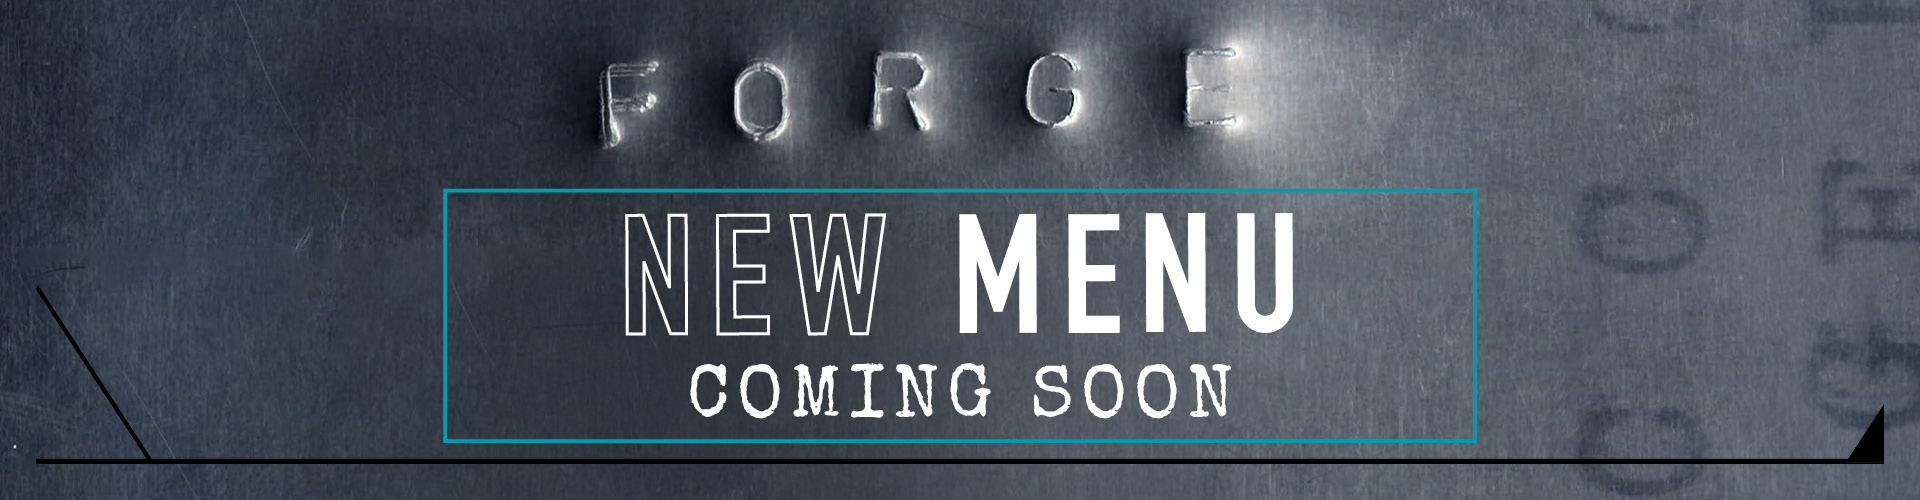 Forge - New Menu Coming Soon.